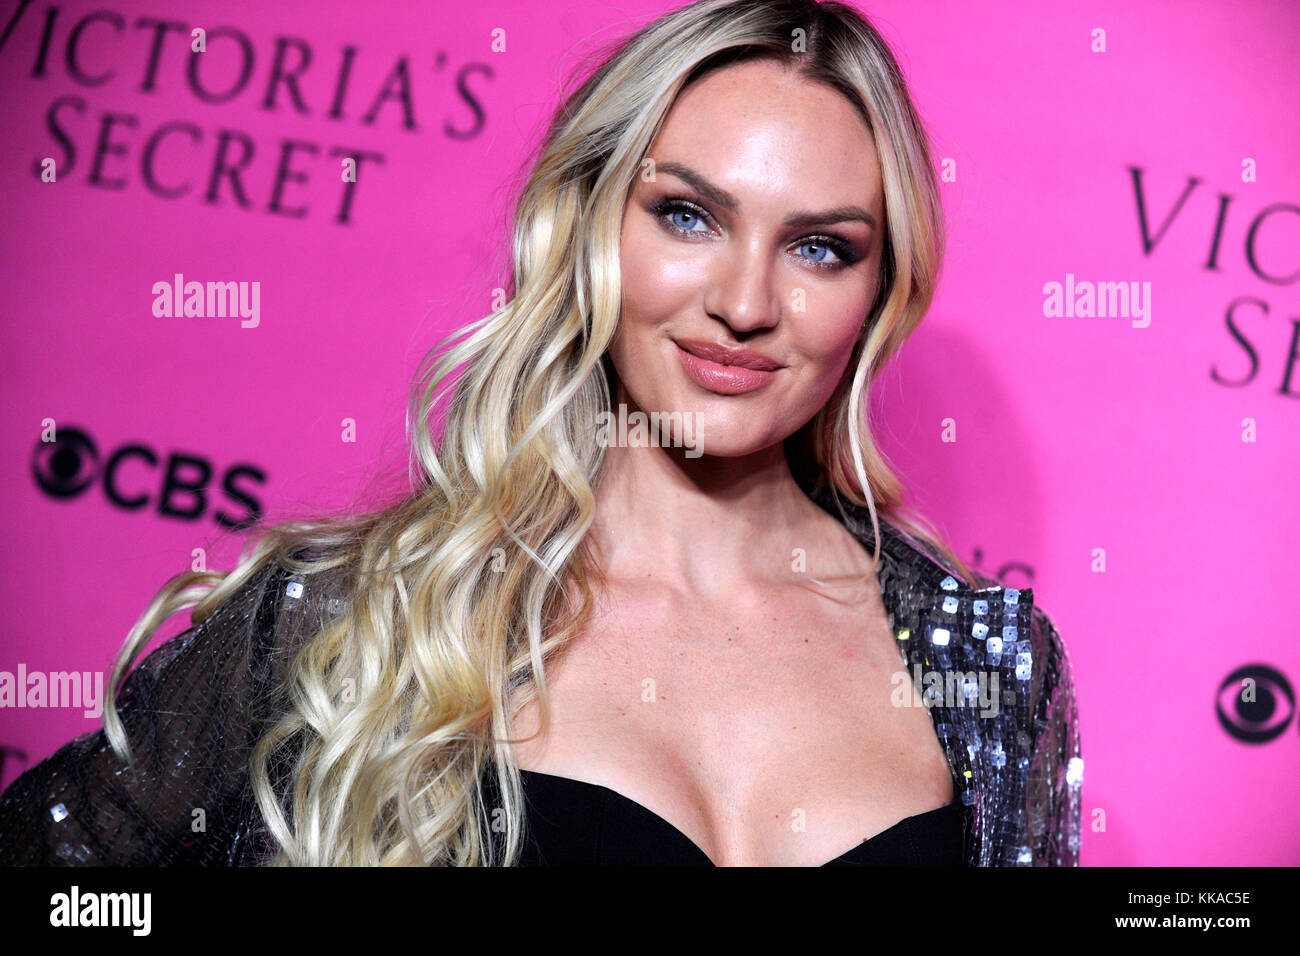 New York, USA. 28th Nov, 2017. Candice Swanepoel attends the 2017 Victoria's Secret Fashion Show viewing party pink carpet at Spring Studios on November 28, 2017 in New York City. Credit: Geisler-Fotopress/Alamy Live News Stock Photo